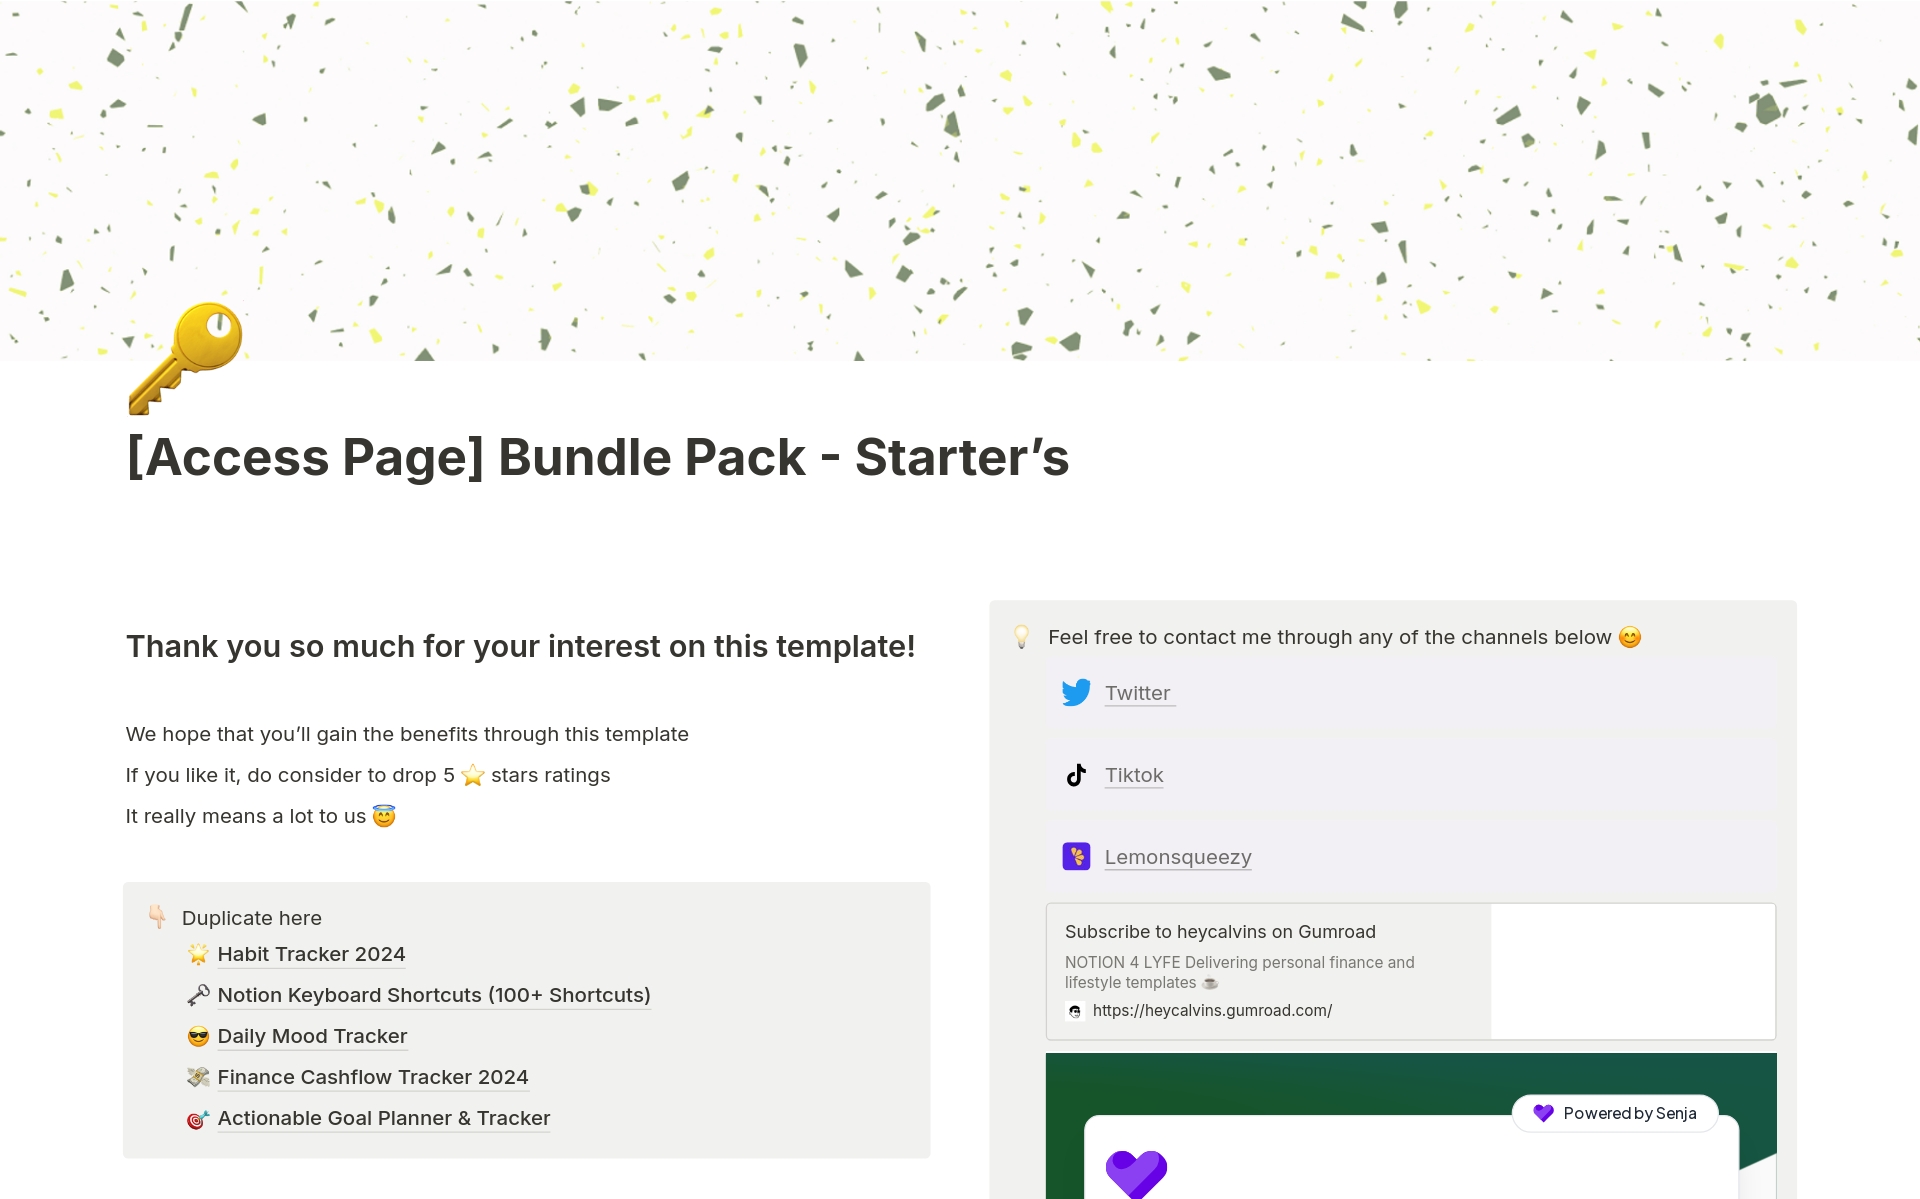 Made for you who wants to jumpstart your Notion journey

Bundle Pack Content:
• Habit Tracker 2024
• Finance Cashflow Tracker 2024
• Notion Keyboard Shortcuts
• Actionable Goal Planner & Tracker
• Daily Mood Tracker & Journal 2024